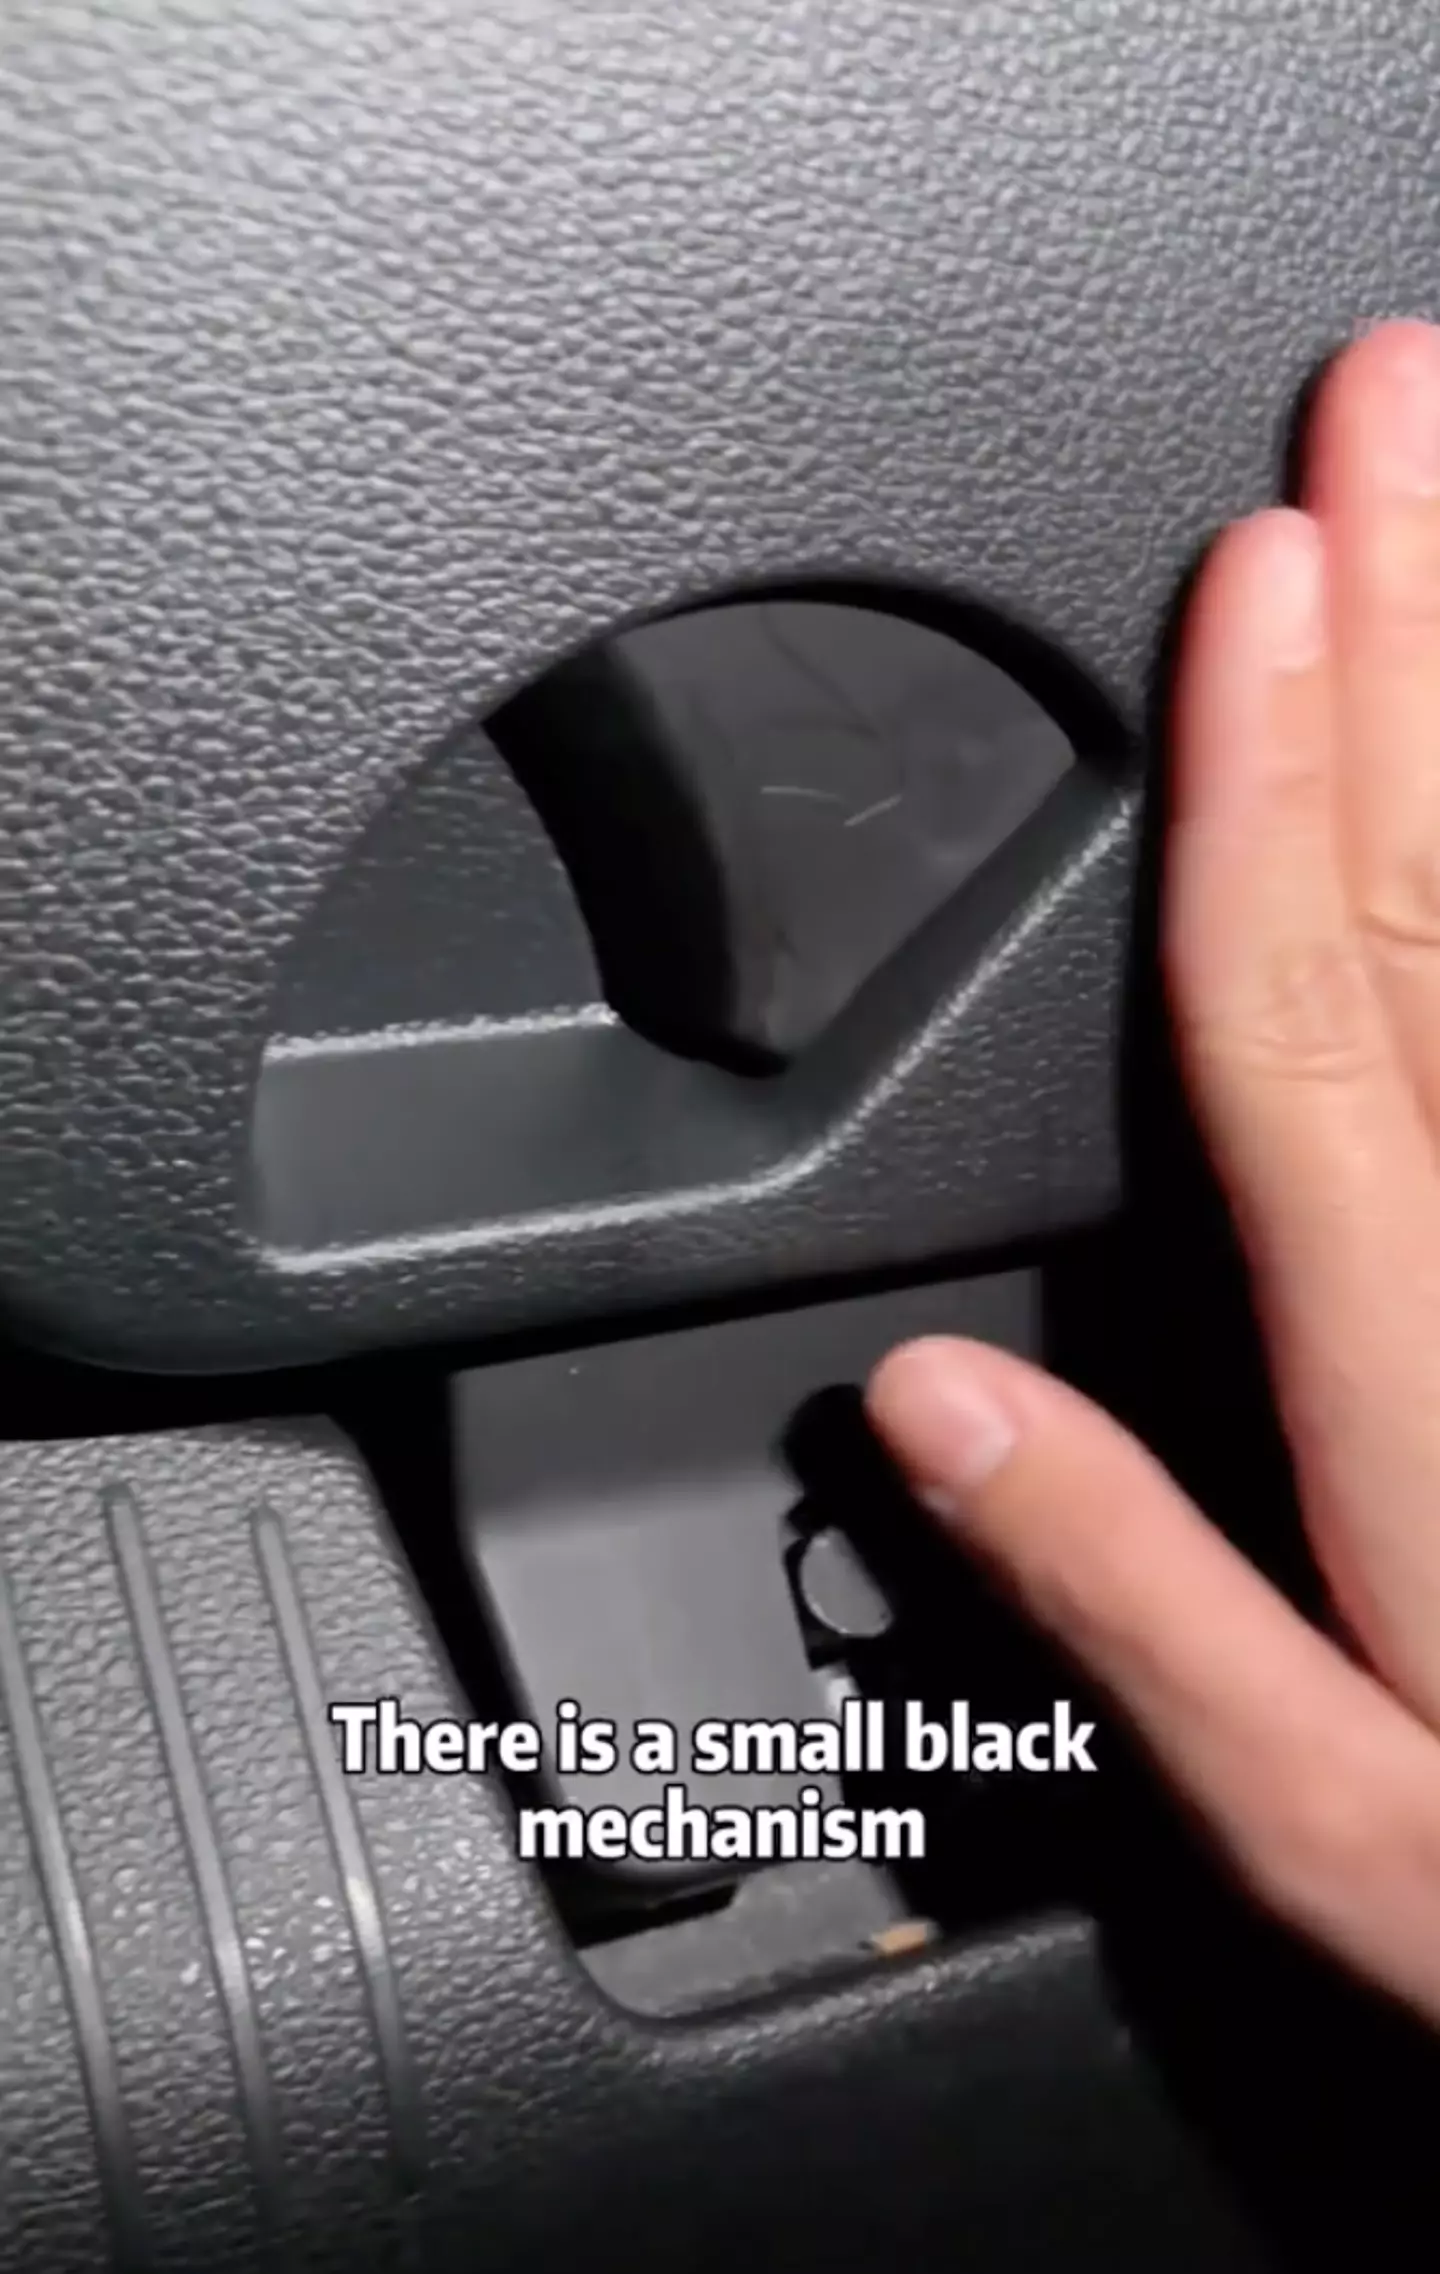 Most cars have the switch in the boot.